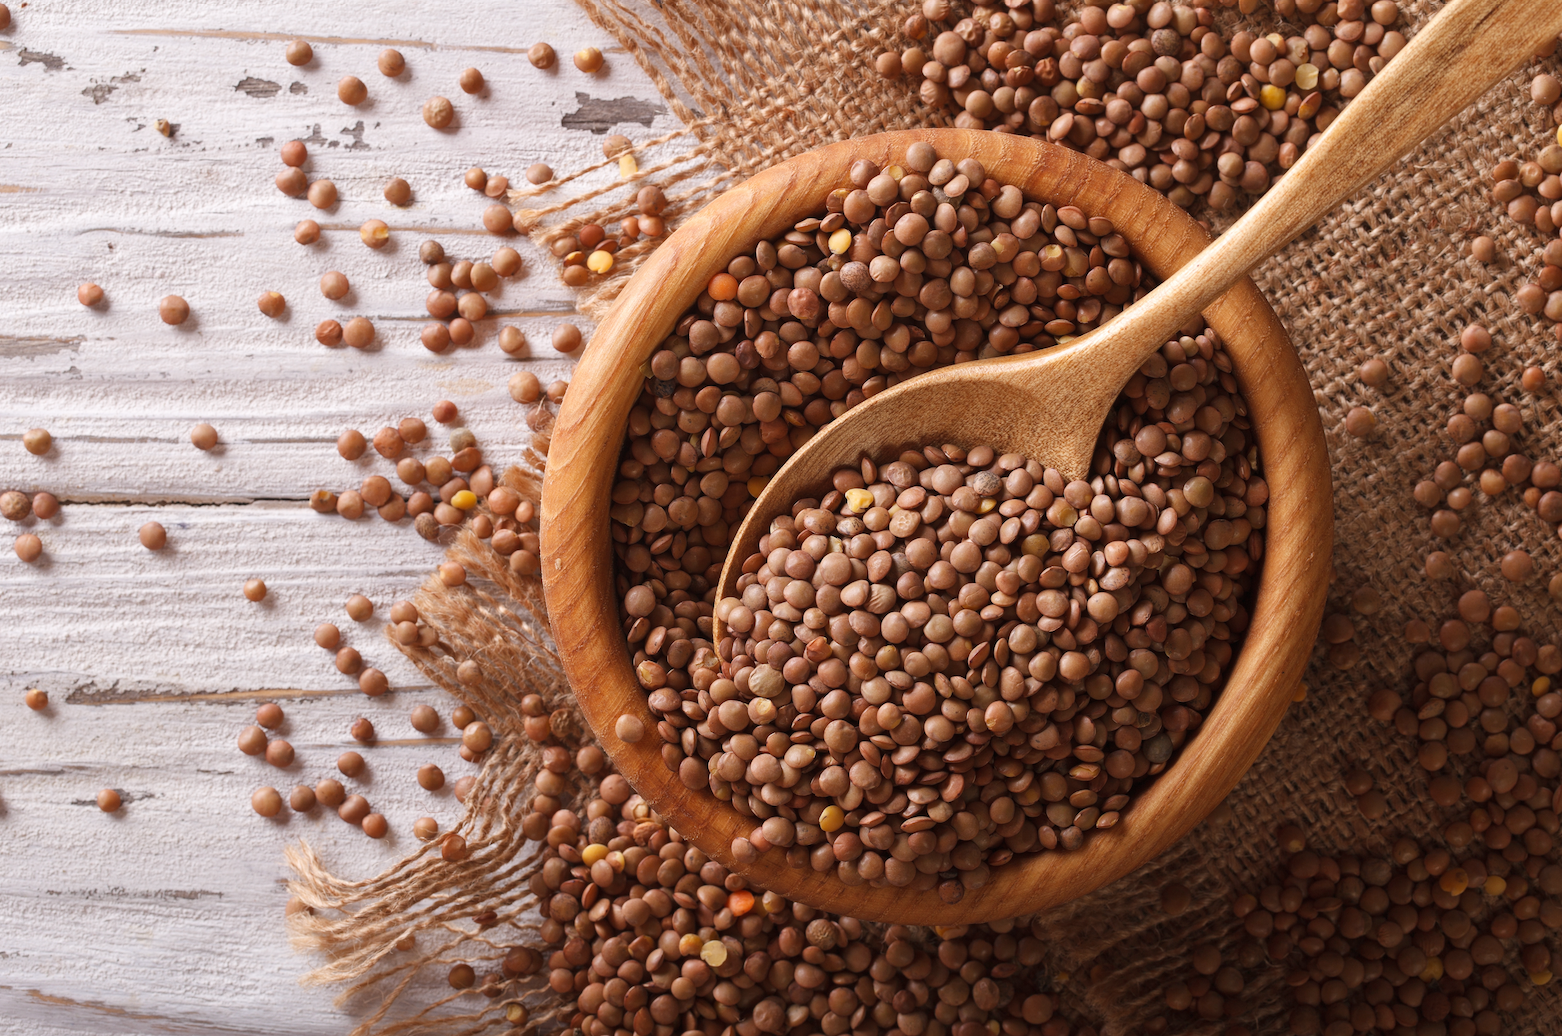 Lentils in Your Skincare? The Many Benefits of This Little Legume | are lentils good for the skin, lentil extract skin benefits , skin benefits of lentil extract , natural antioxidant ingredients